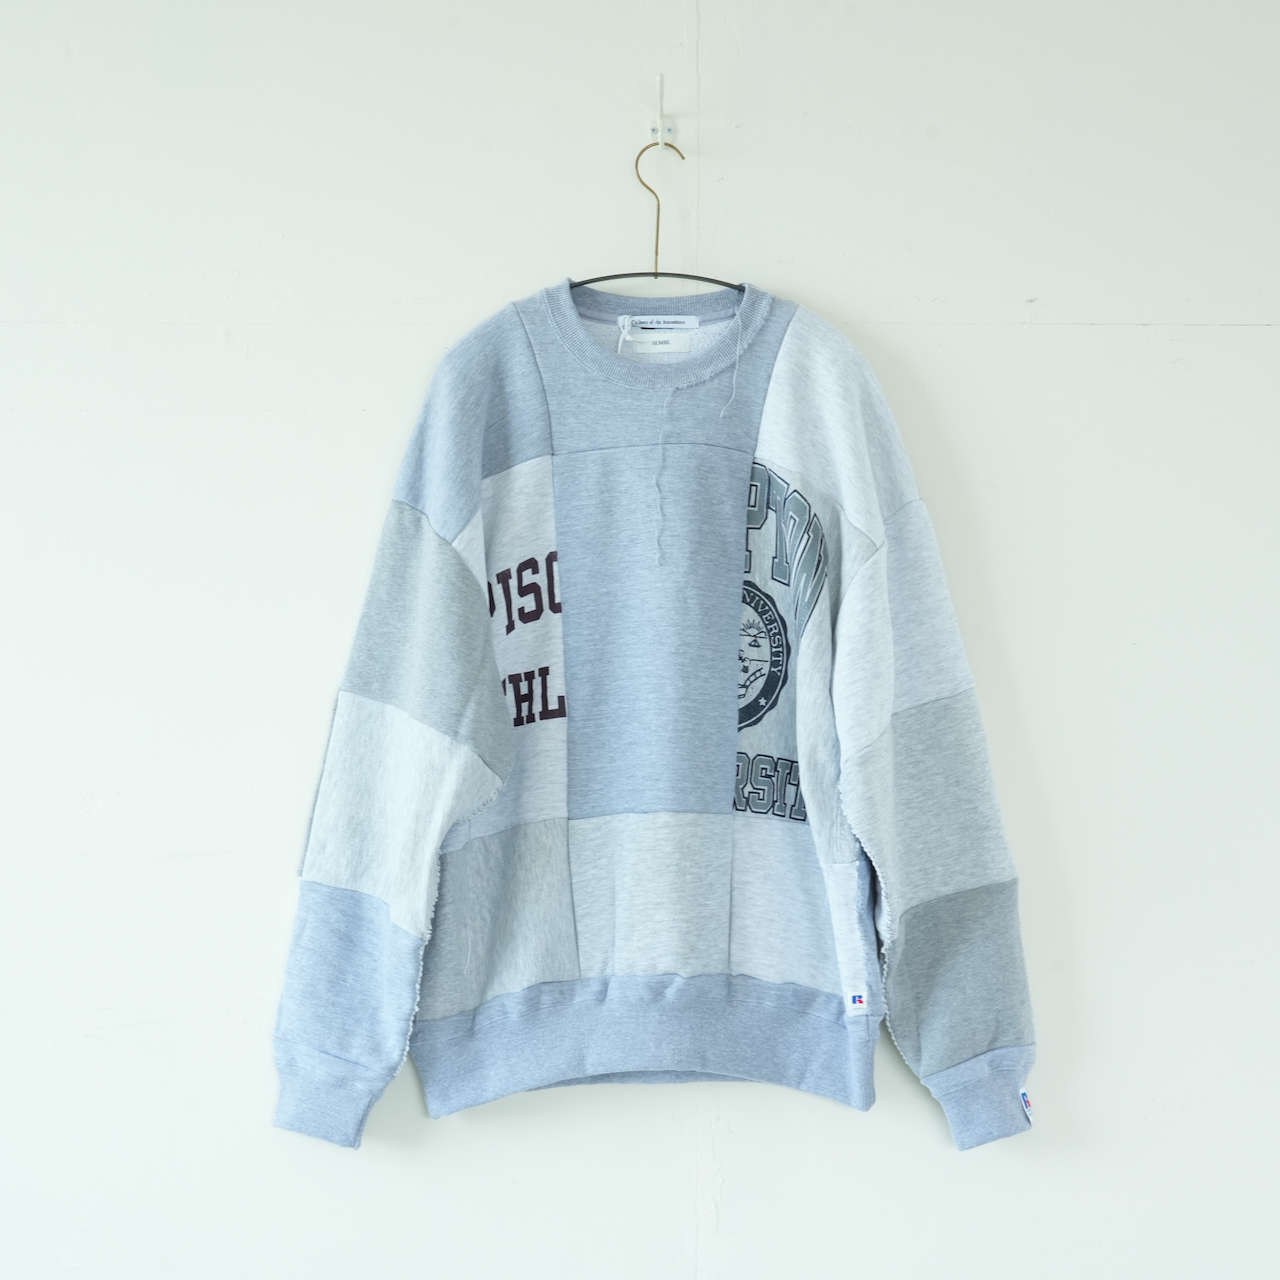 Children of the discordance・PATCH WORK VINTAGE SWEAT PULLOVER (SIZE2)